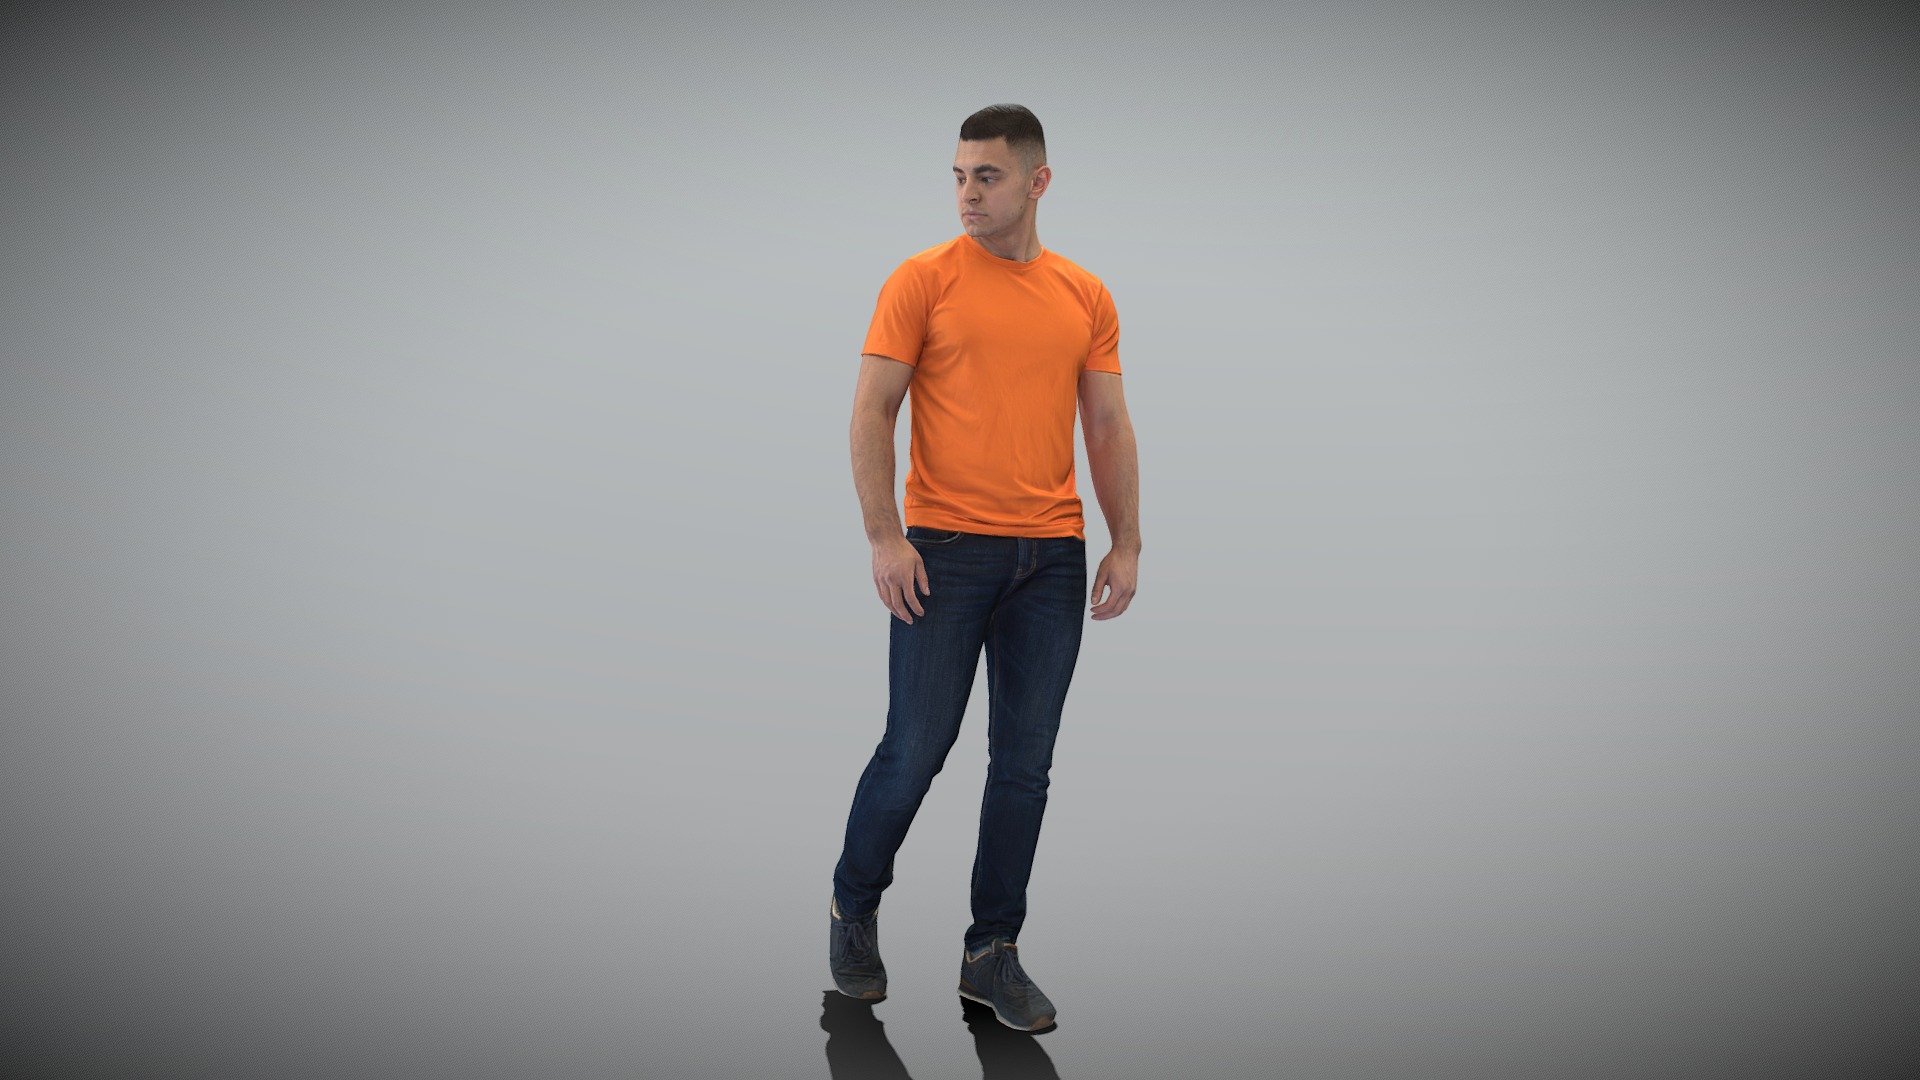 This is a true human size and detailed model of a handsome young man of Caucasian appearance dressed in casual style. The model is captured in casual pose to be perfectly matching to variety of architectural visualization, background character, product visualization e.g. urban installations, city designs, outdoor design presentations, VR/AR content, etc.

Technical specifications:




digital double 3d scan model

150k &amp; 30k triangles | double triangulated

high-poly model (.ztl tool with 5 subdivisions) clean and retopologized automatically via ZRemesher

sufficiently clean

PBR textures 8K resolution: Diffuse, Normal, Specular maps

non-overlapping UV map

no extra plugins are required for this model

Download package includes a Cinema 4D project file with Redshift shader, OBJ, FBX, STL files, which are applicable for 3ds Max, Maya, Unreal Engine, Unity, Blender, etc. All the textures you will find in the “Tex” folder, included into the main archive.

3D EVERYTHING

Stand with Ukraine! - Young man walking 409 - Buy Royalty Free 3D model by deep3dstudio 3d model